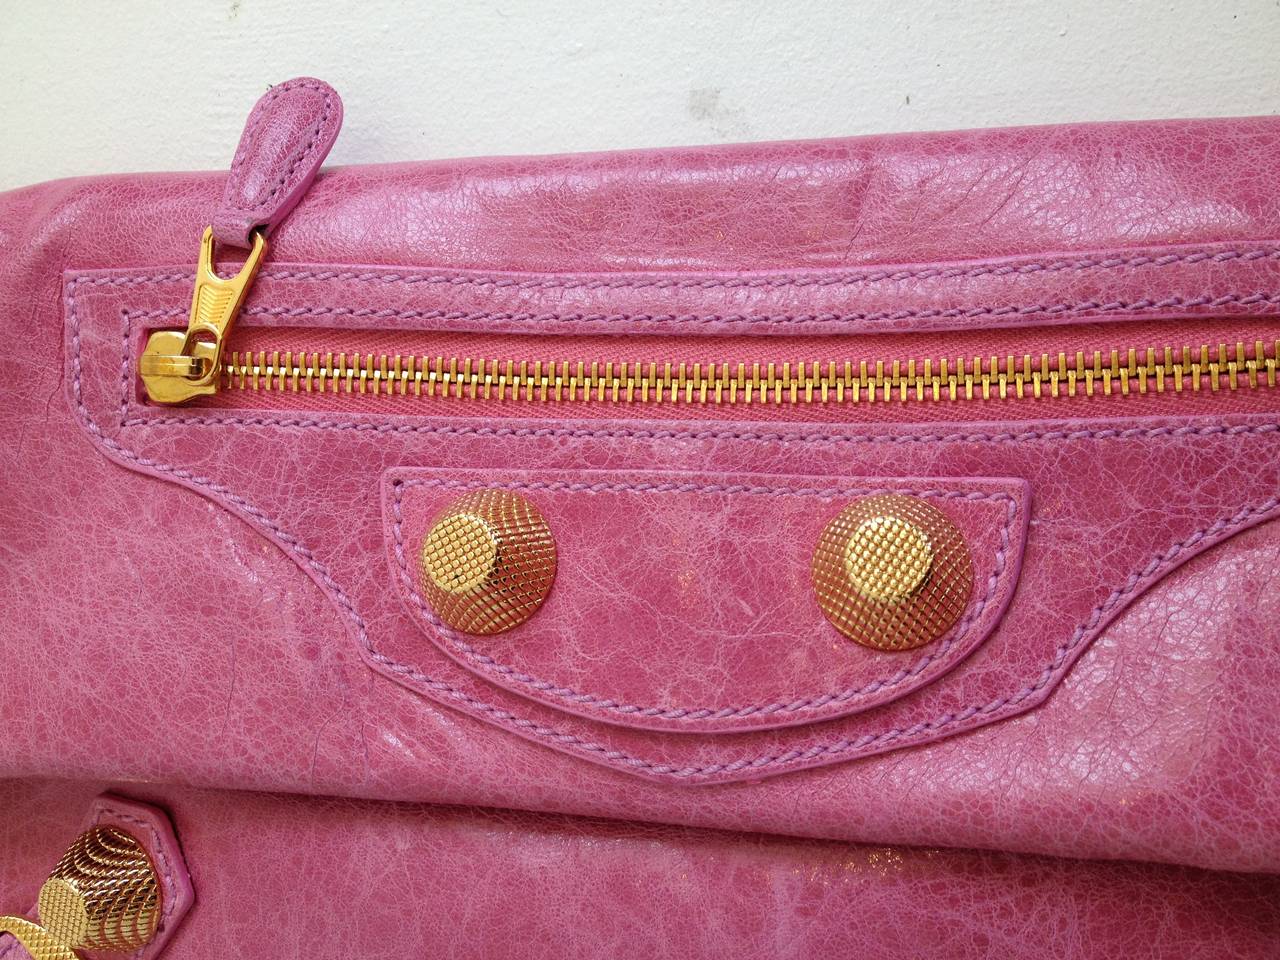 Women's Balenciaga Pink Giant Envelope Clutch with Gold Hardware